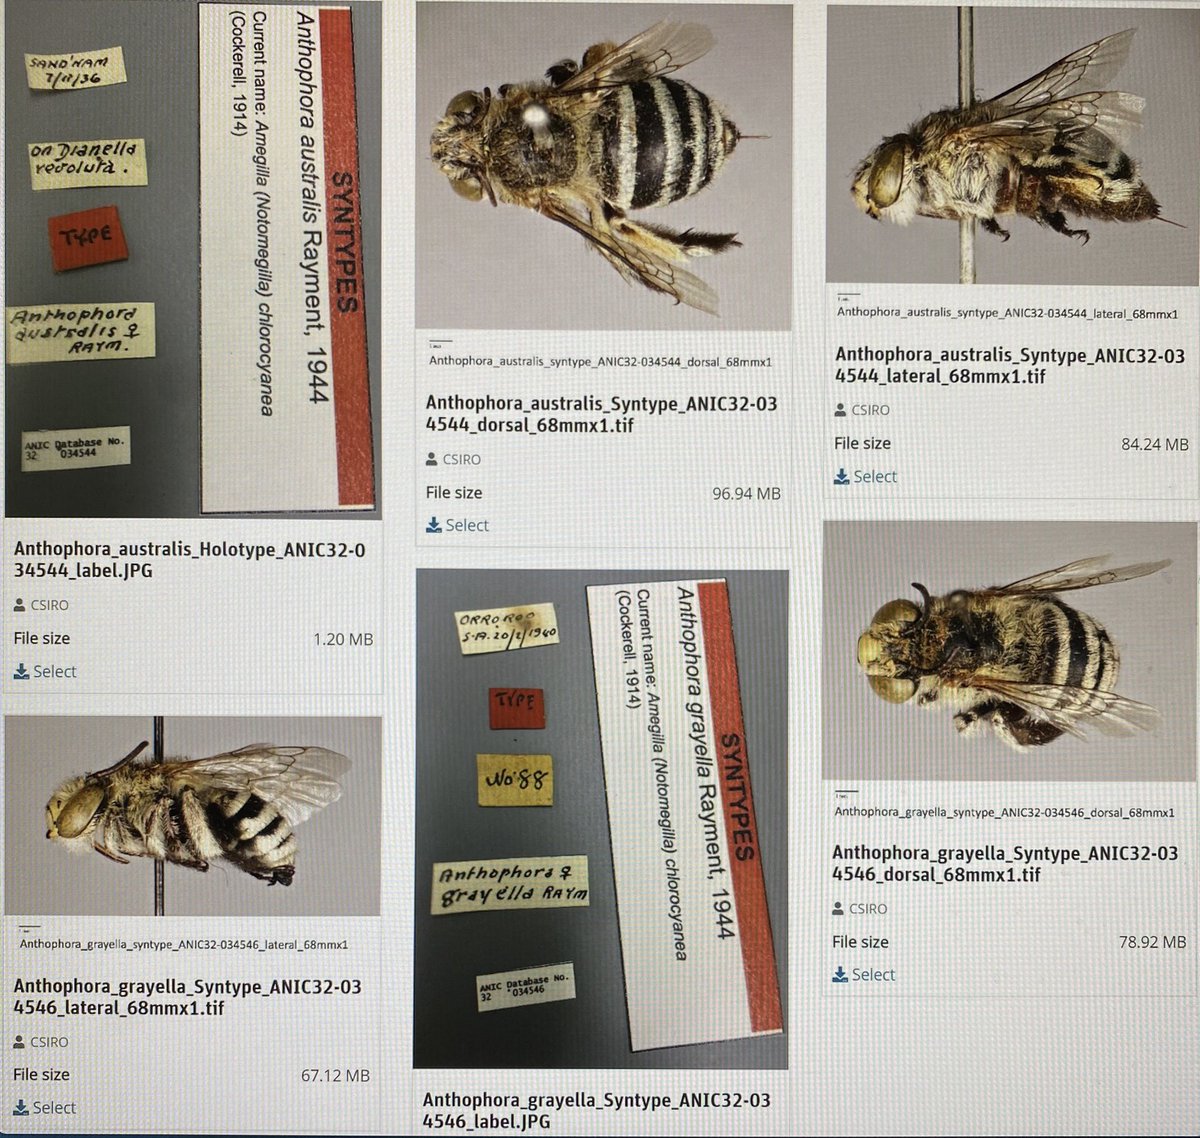 For #WorldBeeDay a little teaser of our #Australian #nativebee ANIC primary types dataset that will be published soon! Labels, metadata and hi-res images of ~1/4 of Australian native bee species! @csiro @australtaxonomy @AustNatHist #csirocollections #entomology